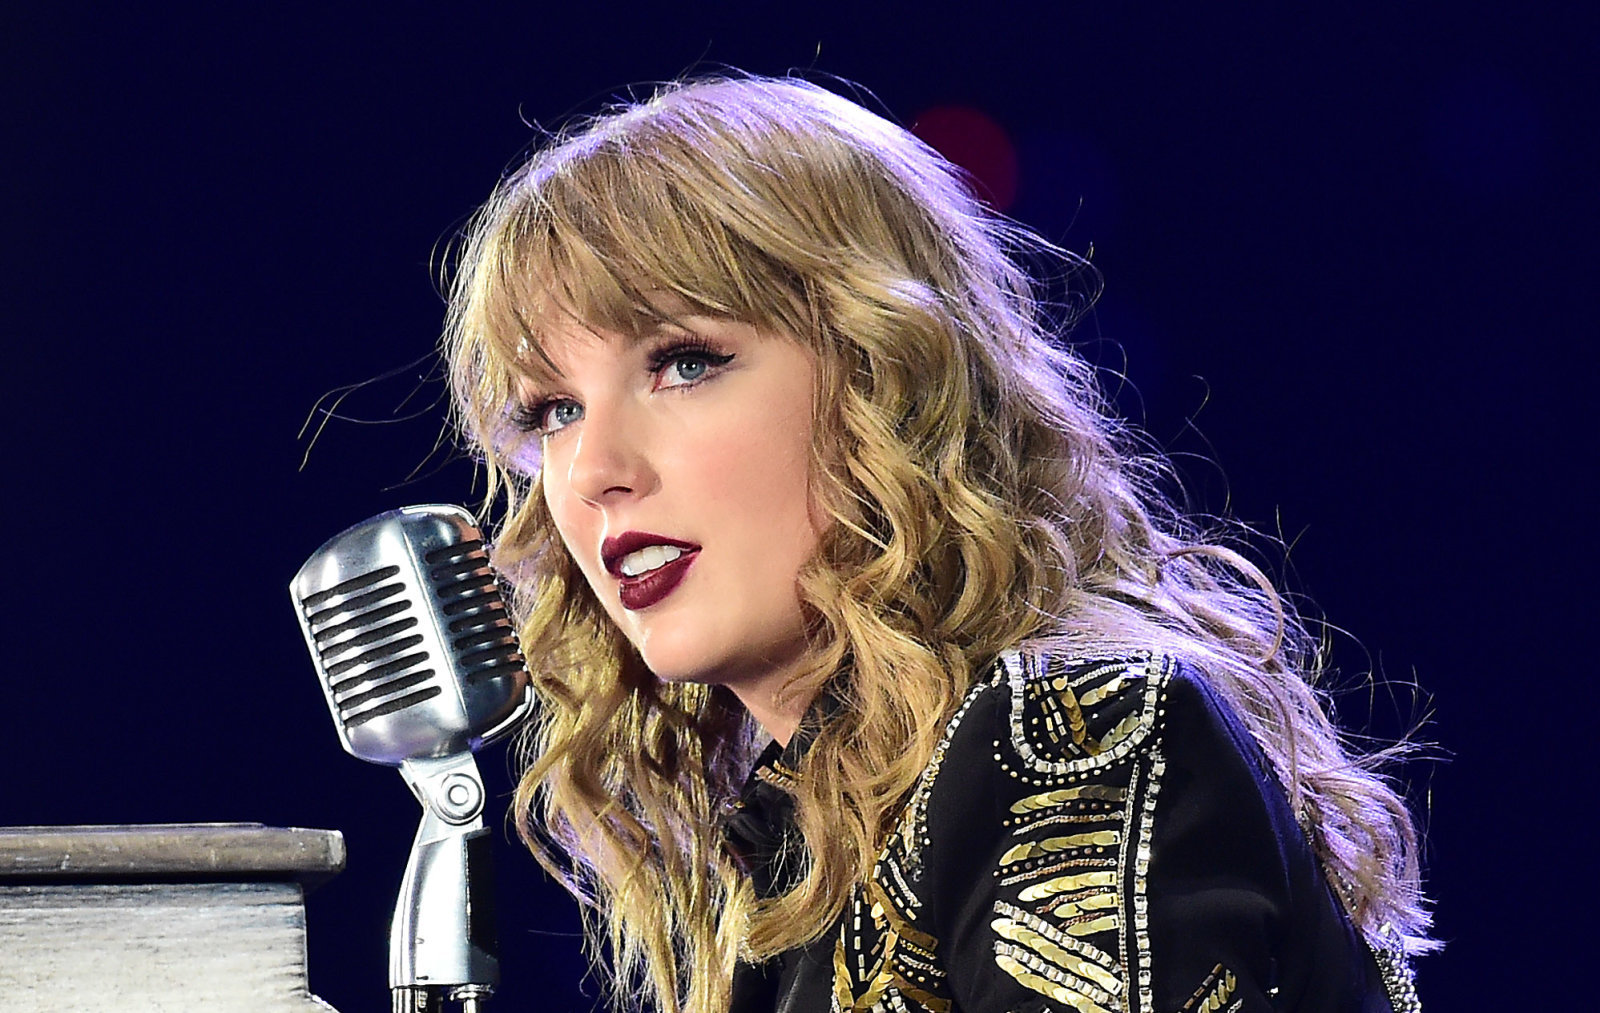 ABC adds Taylor Swift concert